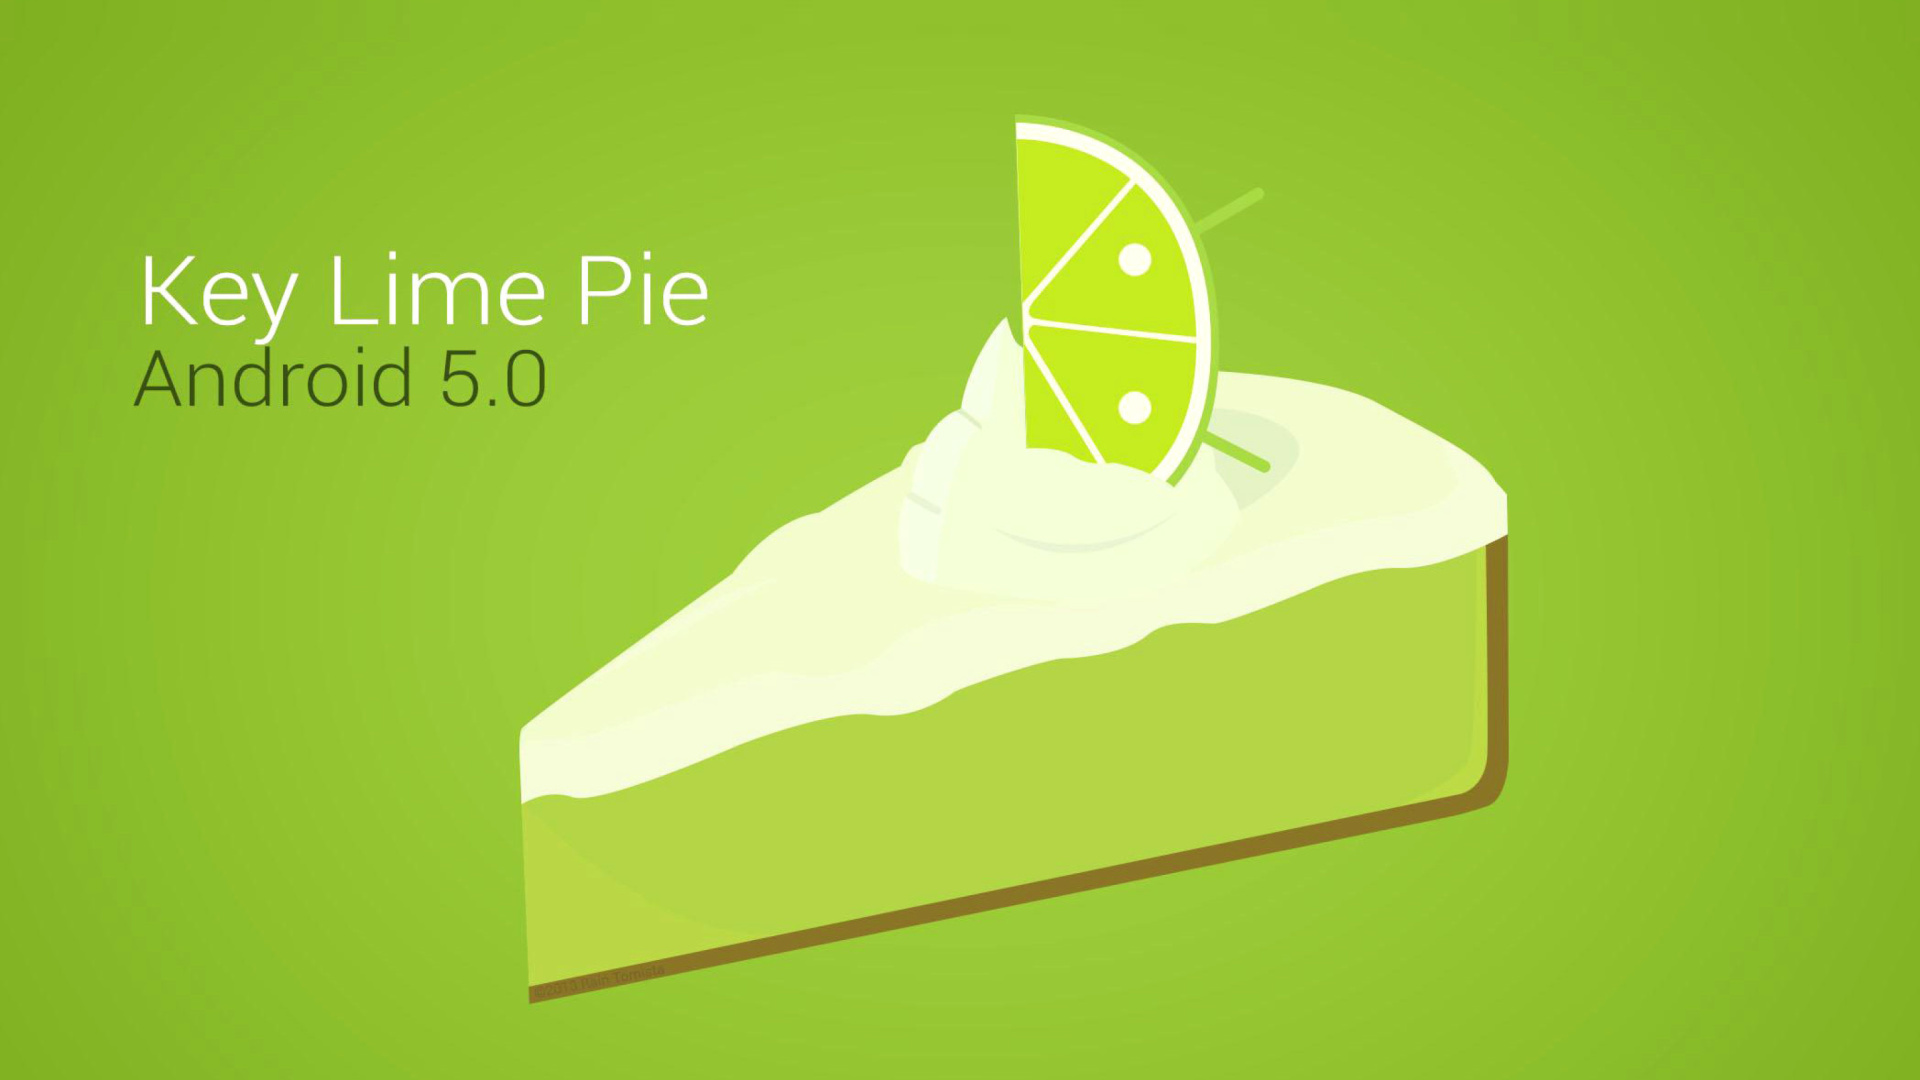 Das Concept Android 5.0 Key Lime Pie Wallpaper 1920x1080